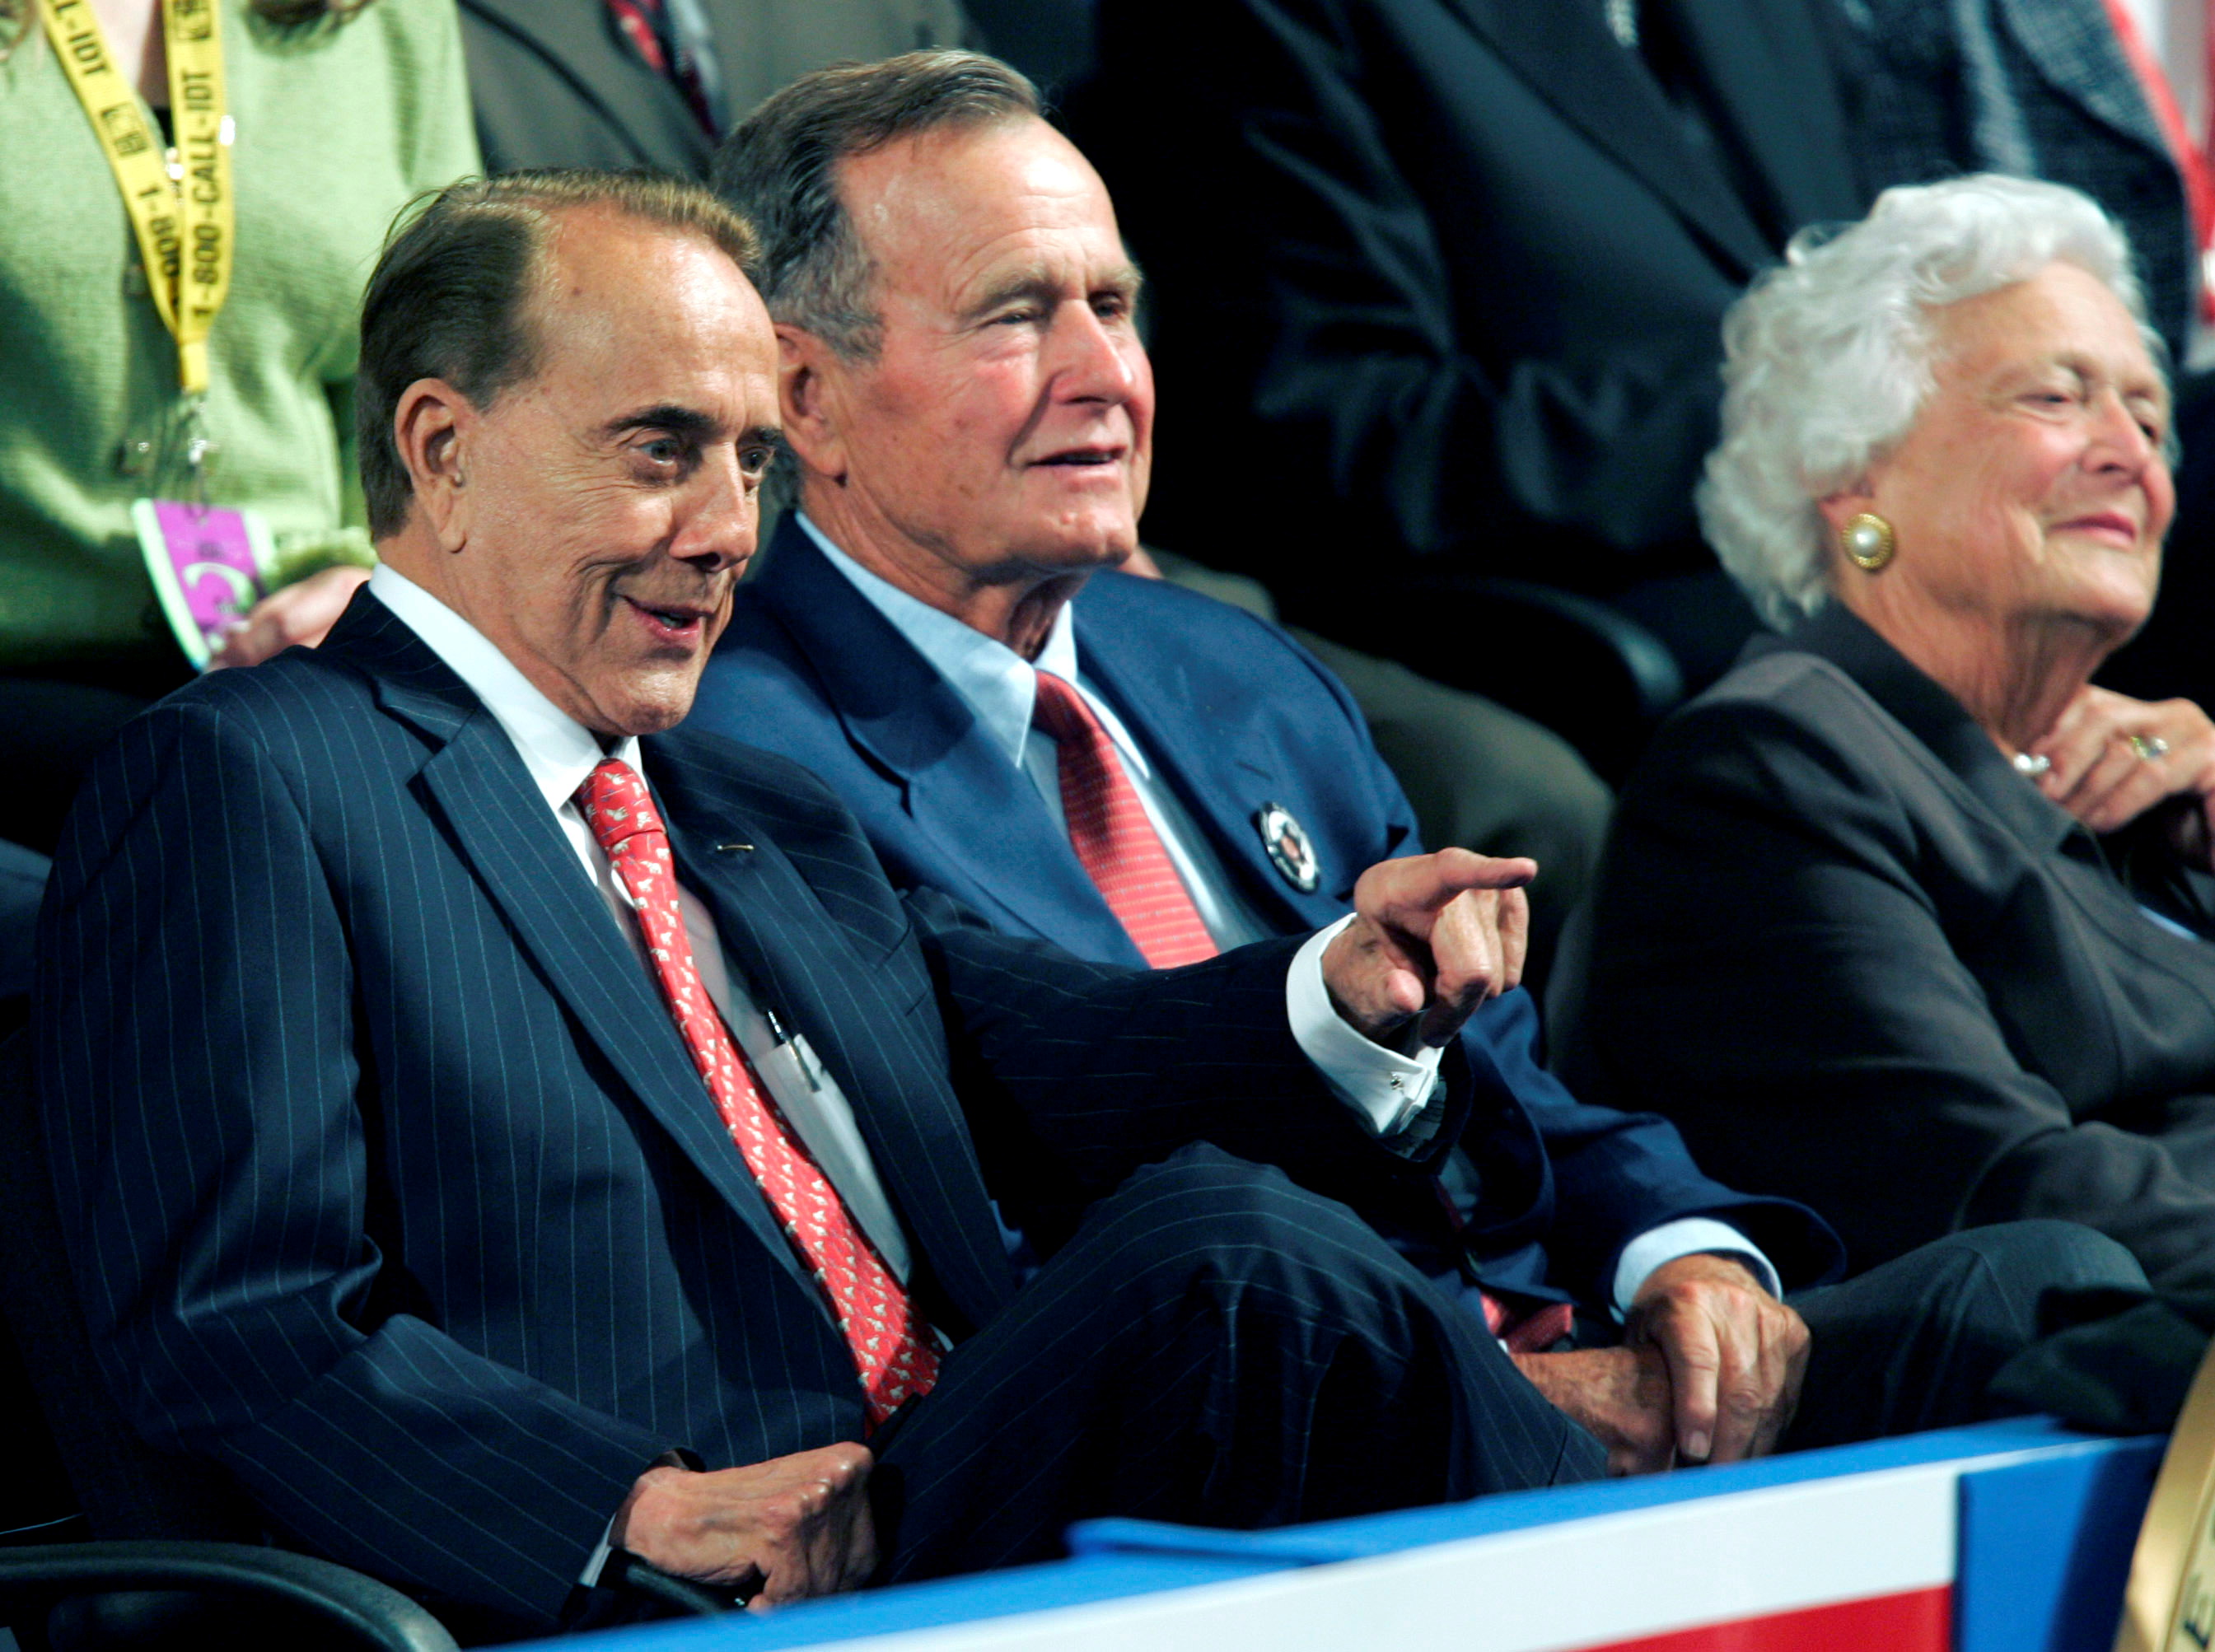 Bob Dole sits with former President Bush and his wife Barbara.